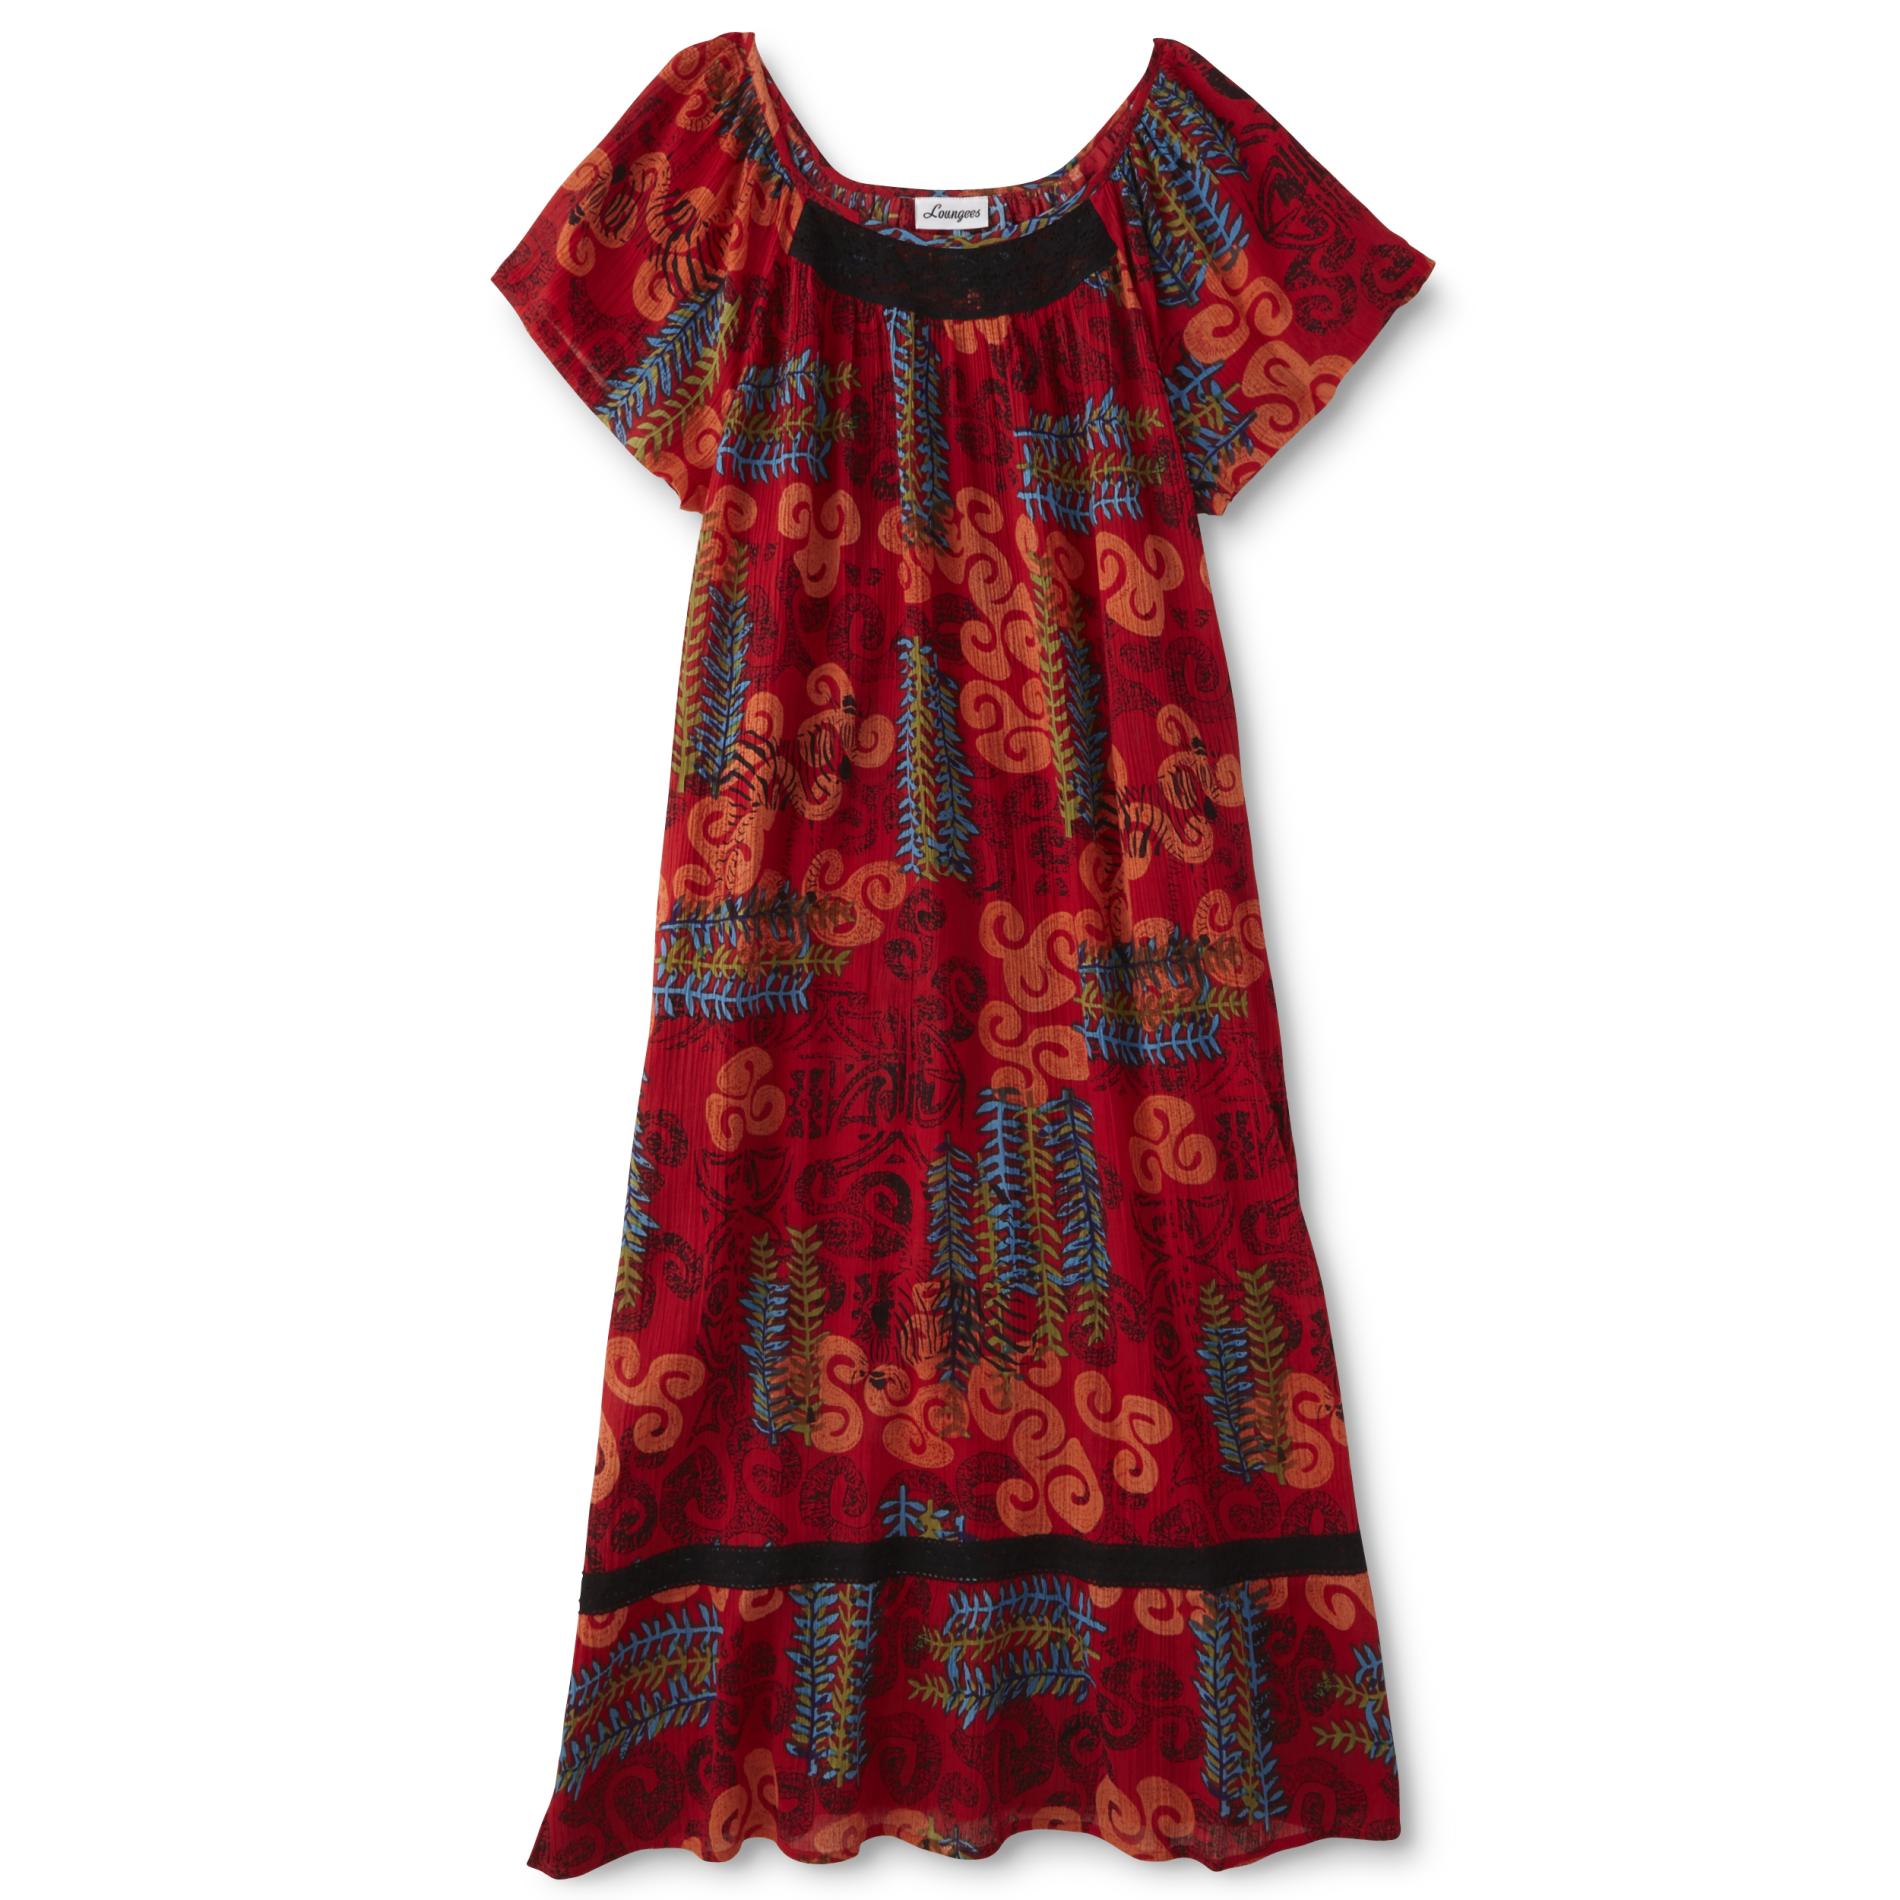 Loungees Women's Caftan - Abstract